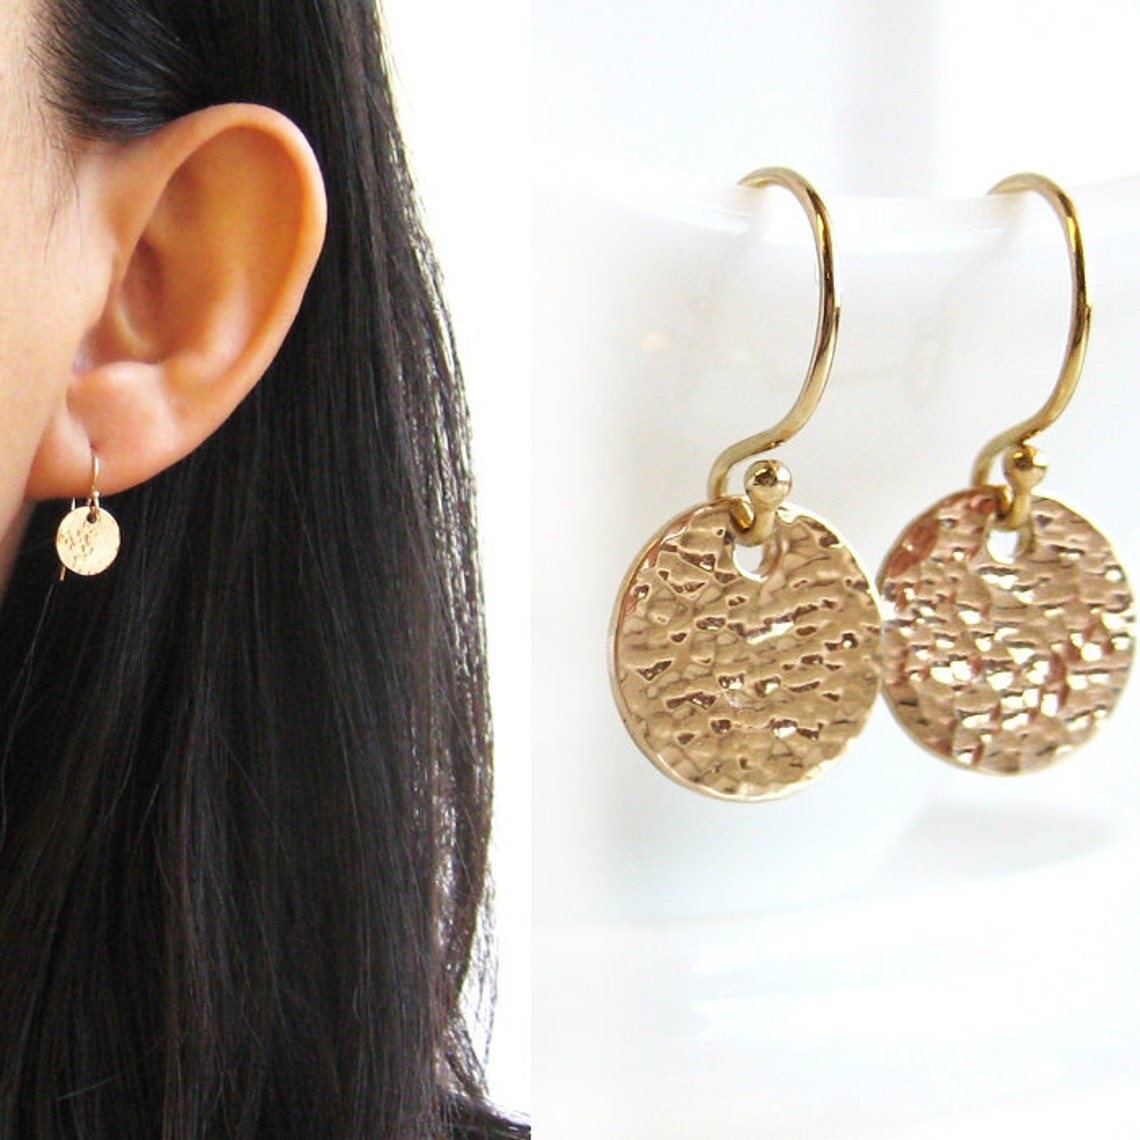 The gold earrings show up close and on a model&#x27;s ear